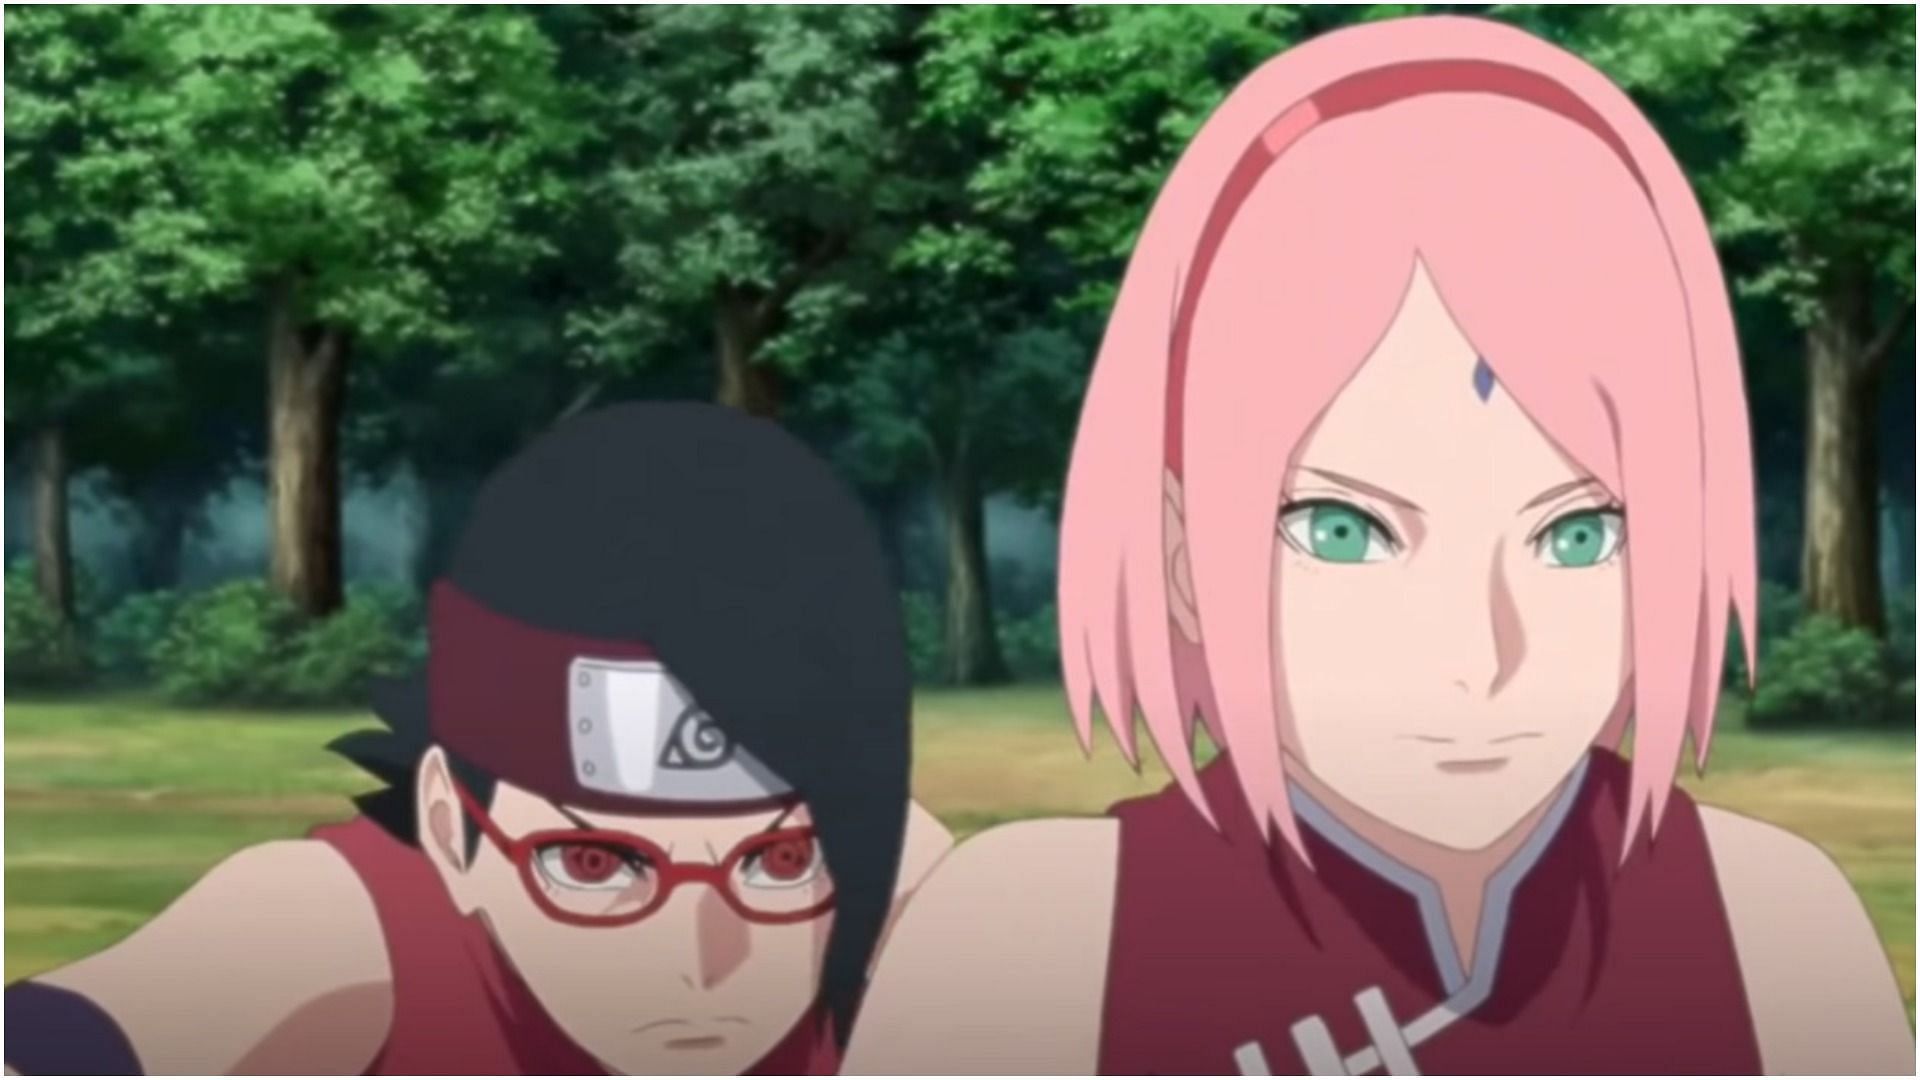 Sakura's lack of communication made her relationship with Sarada extremely complicated (Image via Naruto)